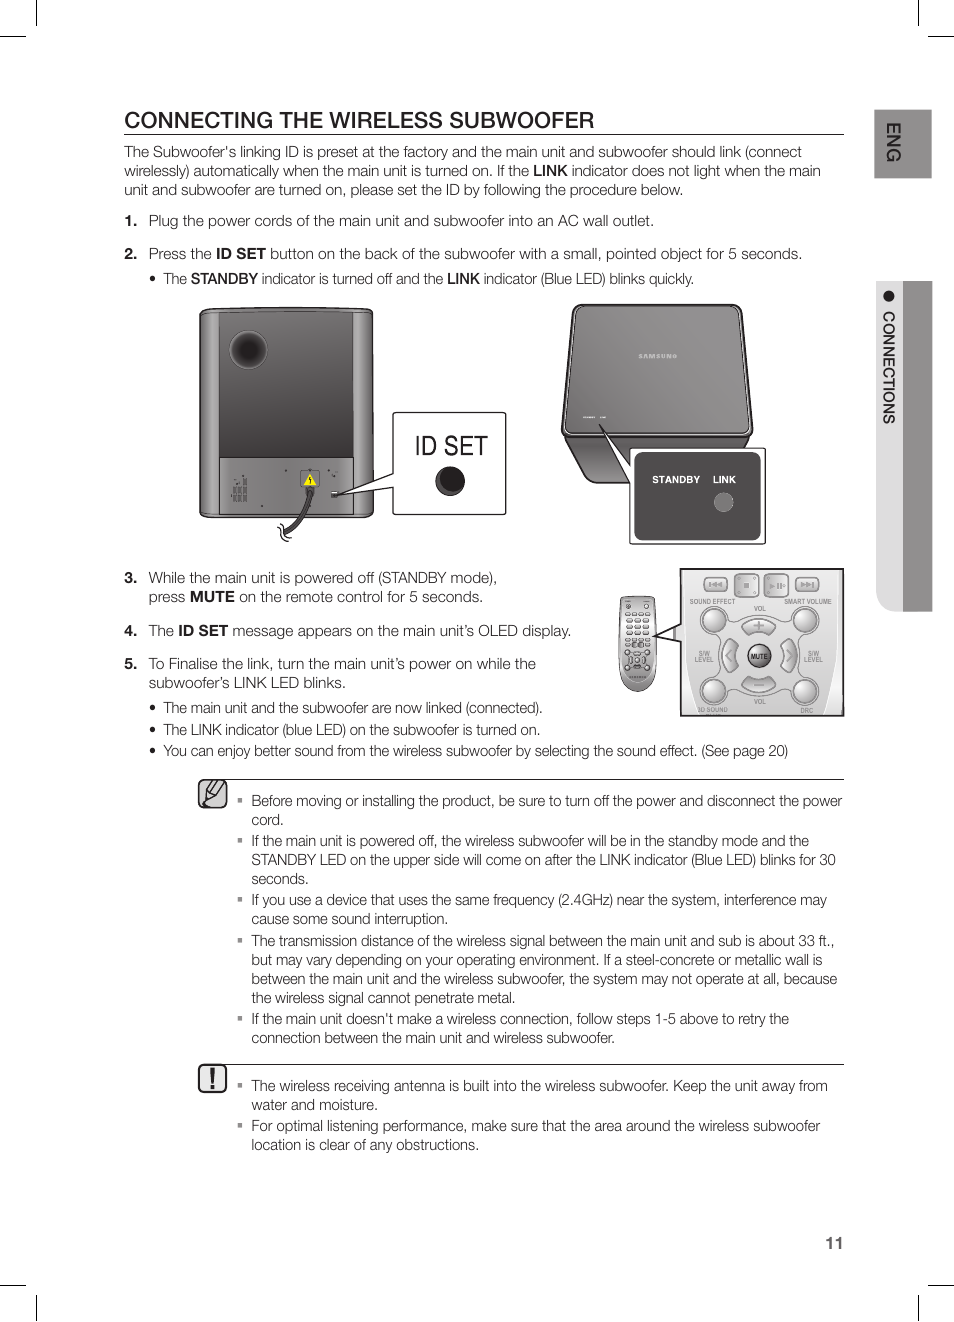 skammel Napier pension Connecting the wireless subwoofer, Conn e ctions | Samsung HW-FM55C-ZA User  Manual | Page 11 / 26